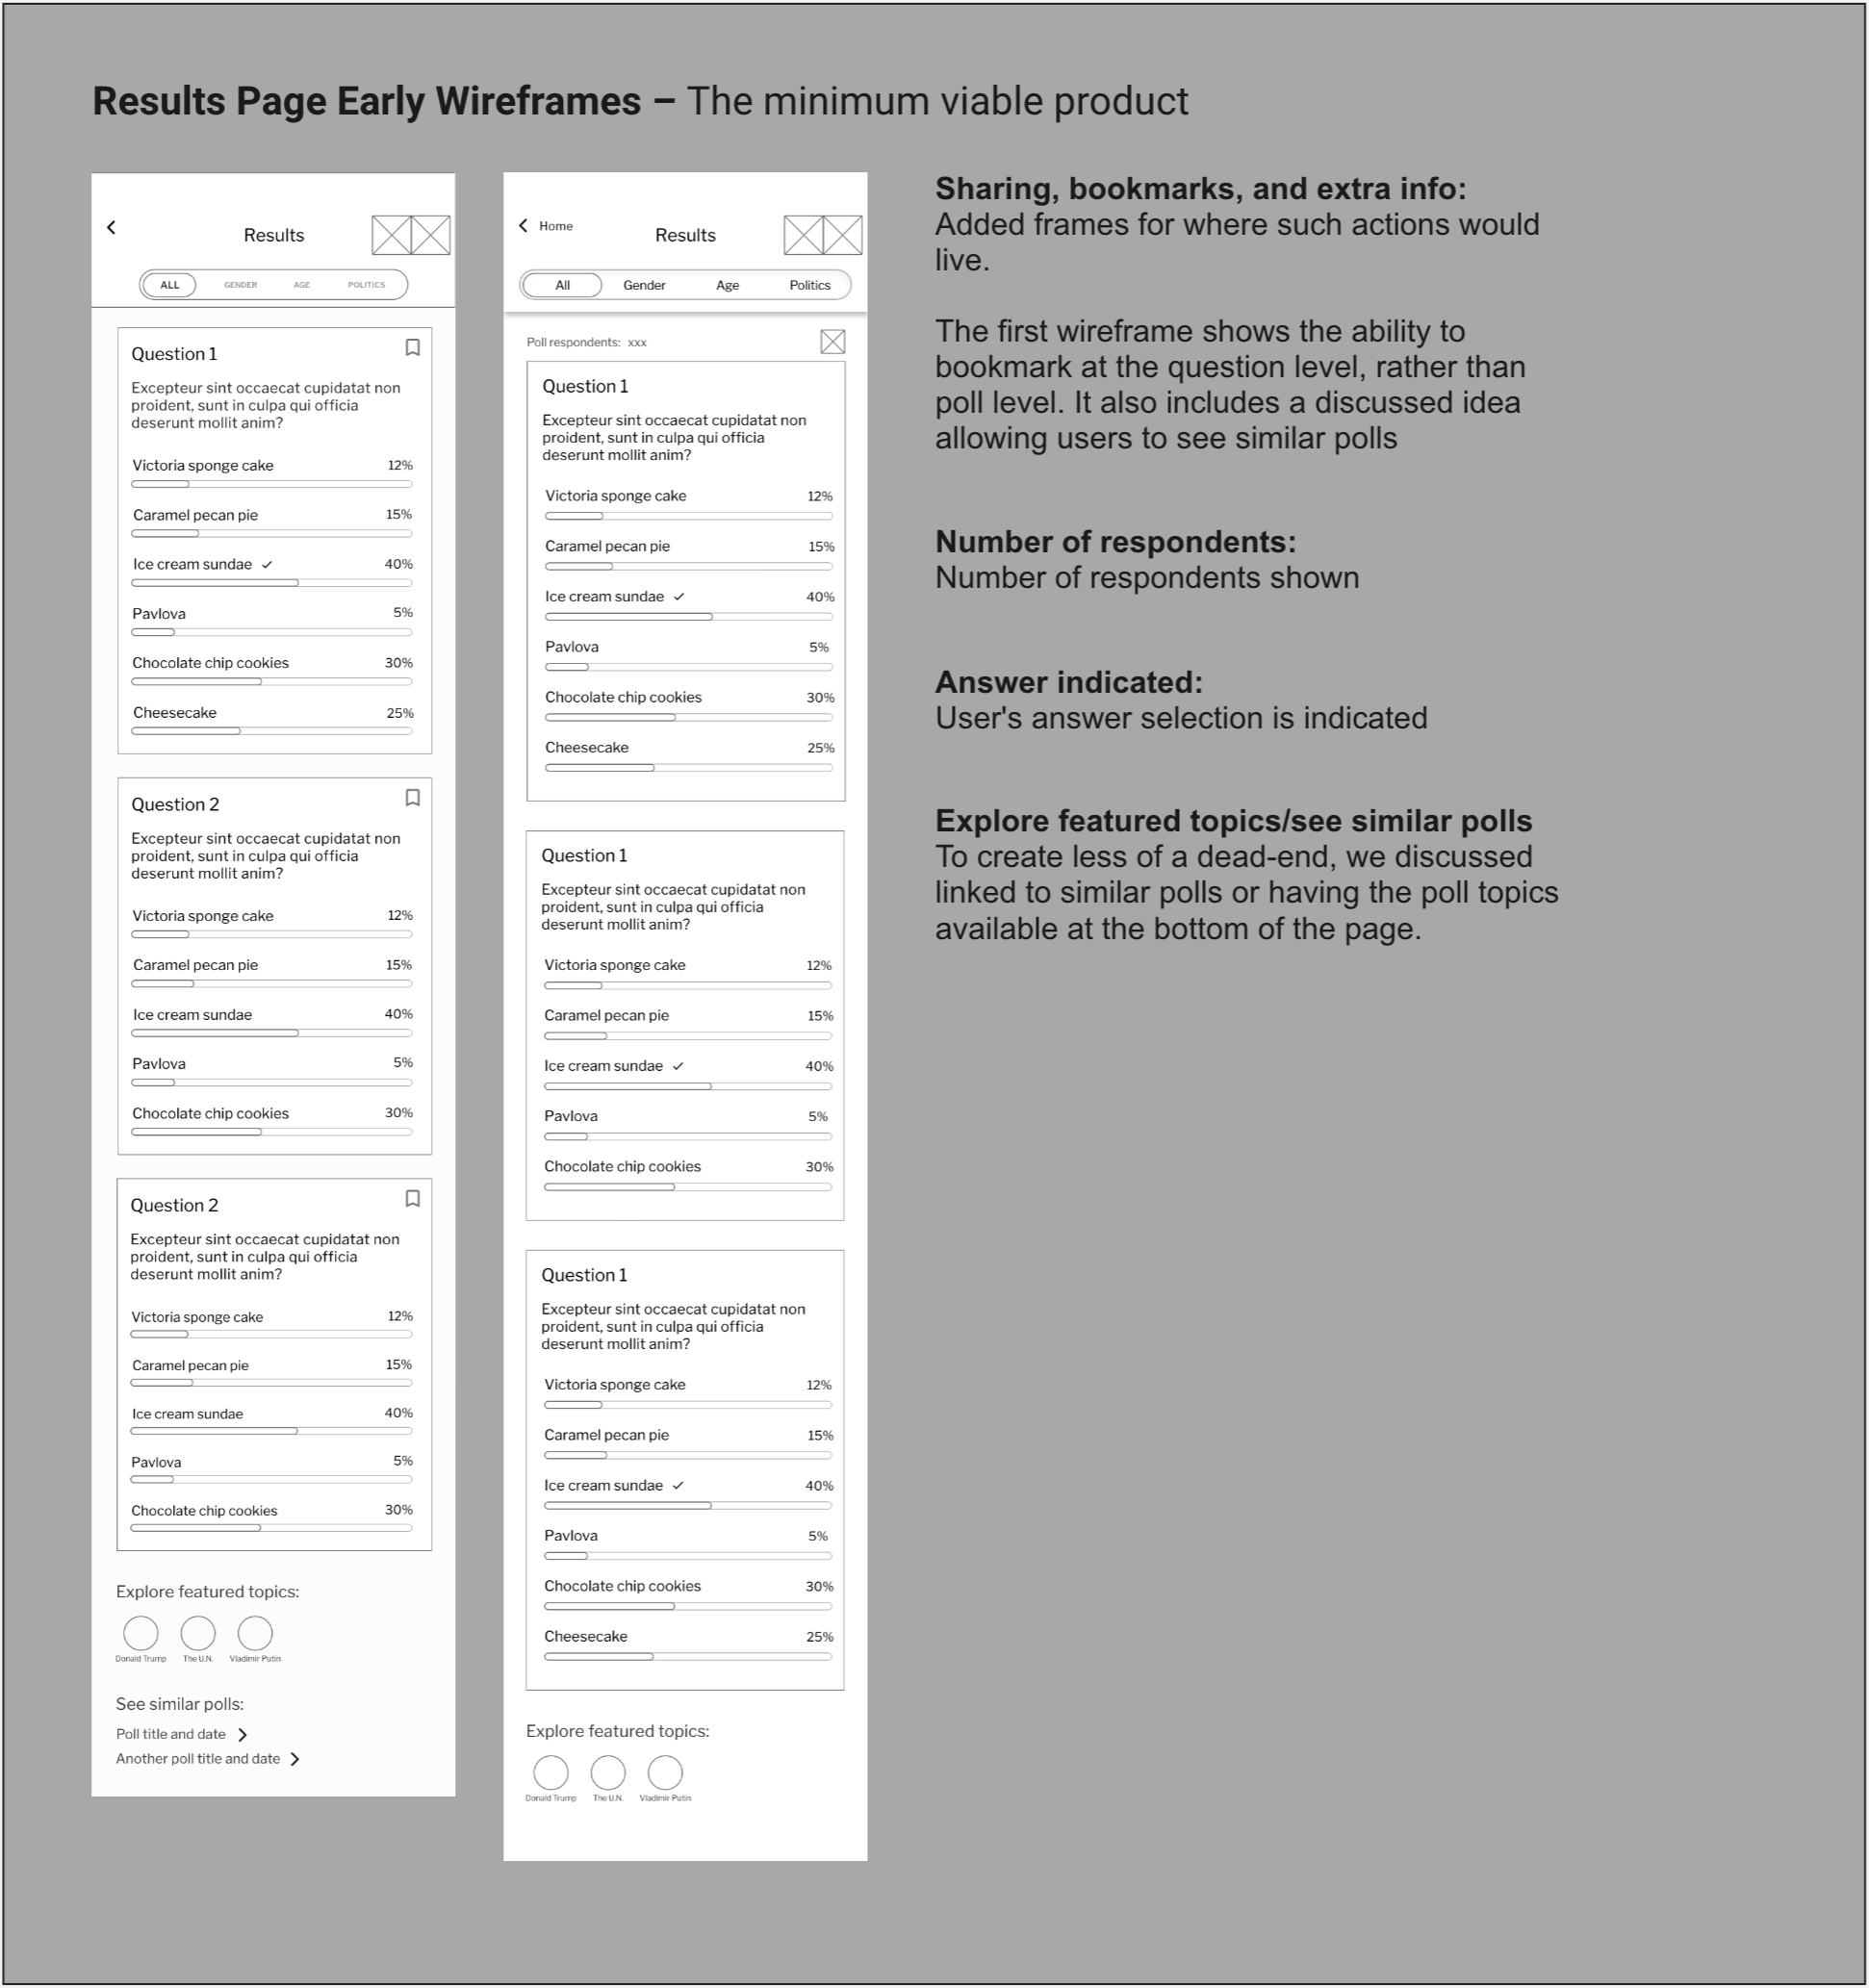 results page early wireframes - mvp.png